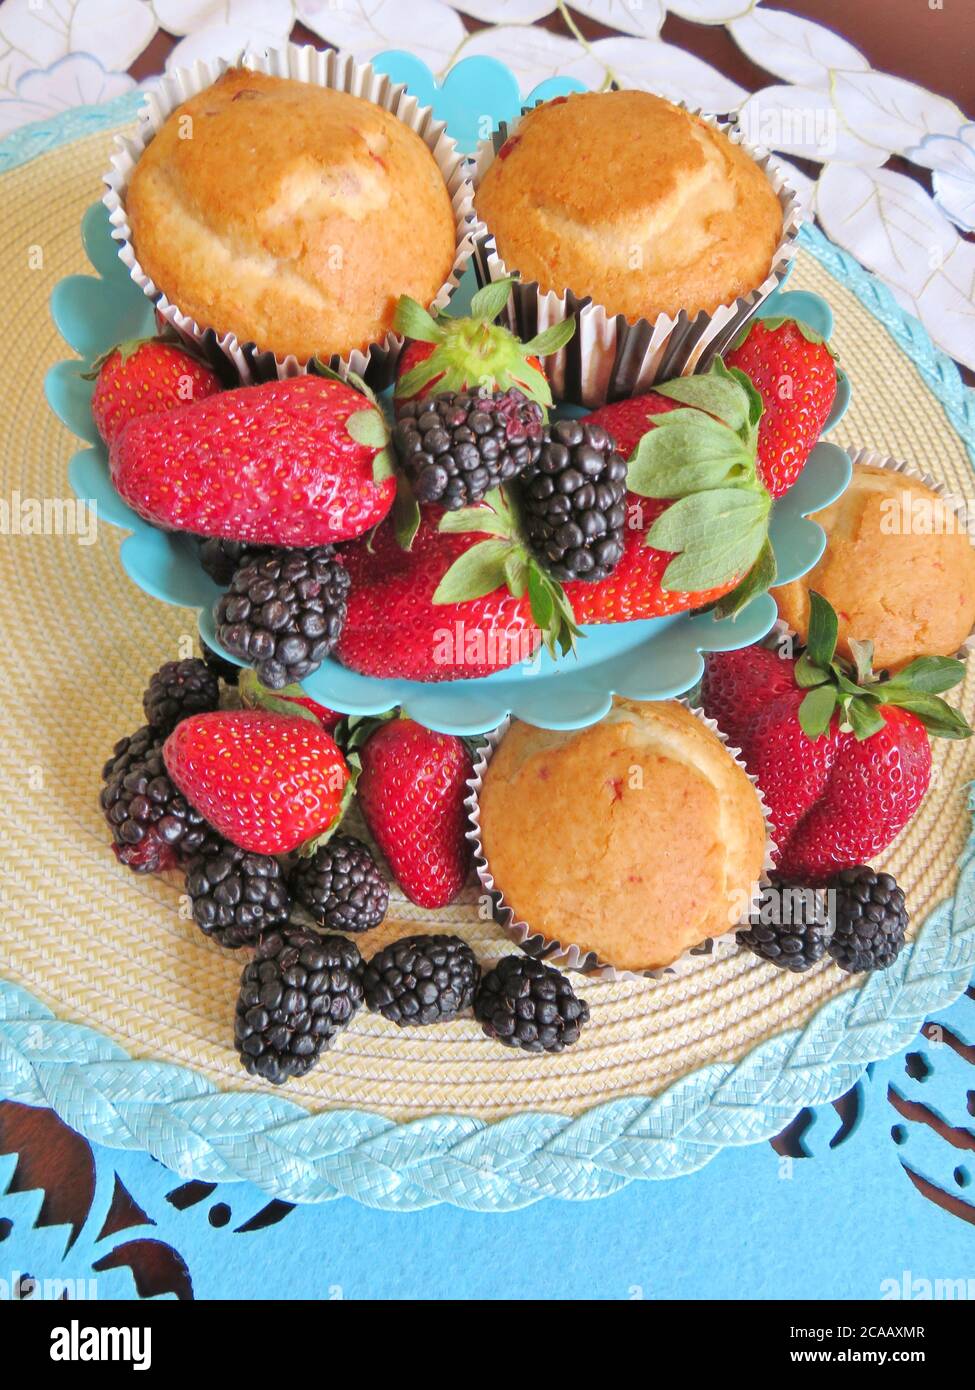 Fresh baked muffins with blueberries and strawberries Stock Photo